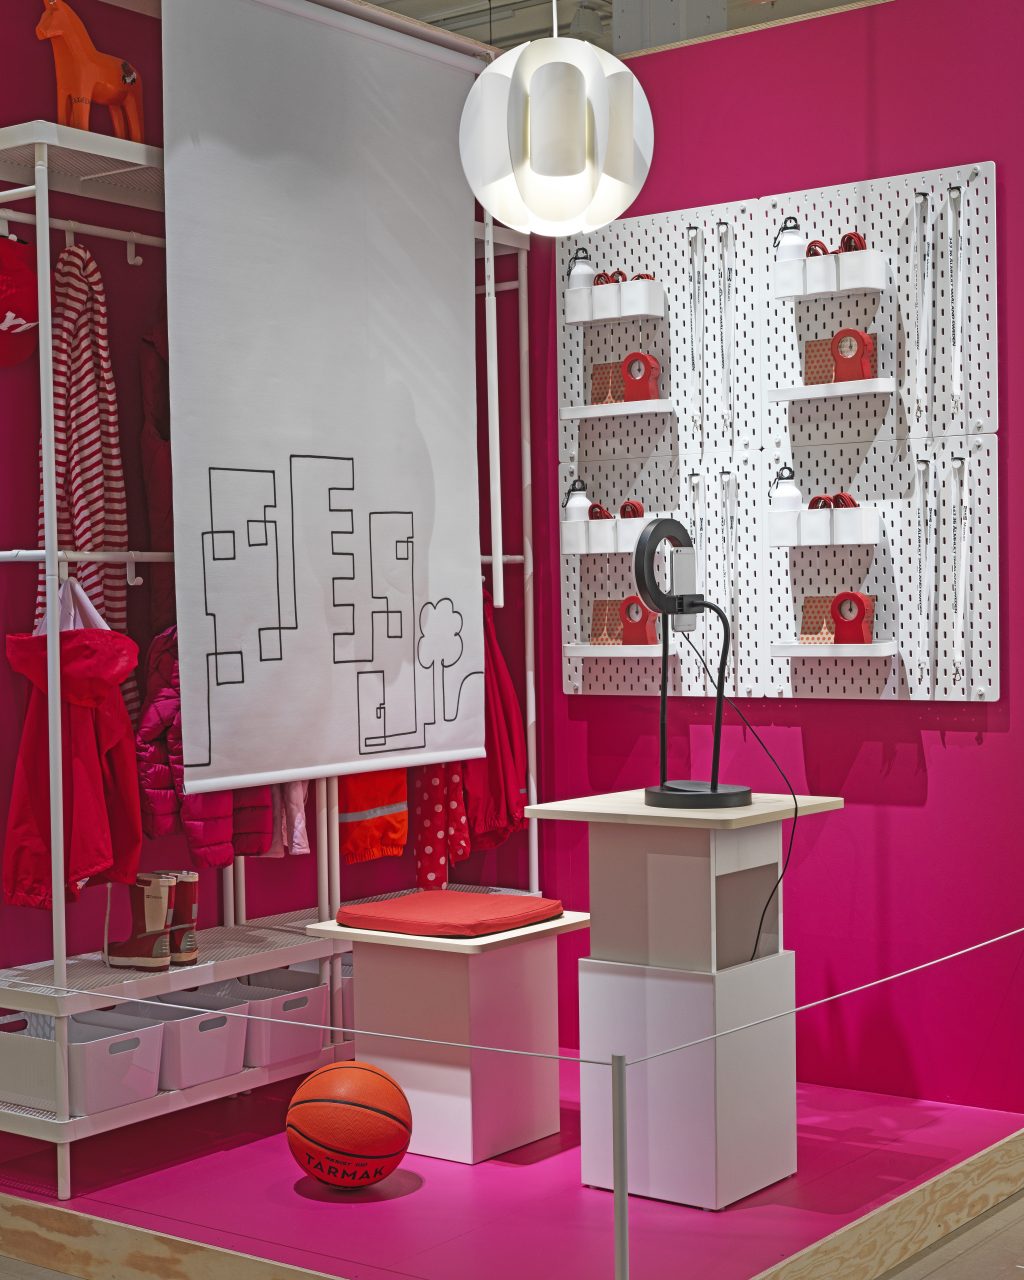 A pink room with the possibility to store clothes and space for digital meetings.